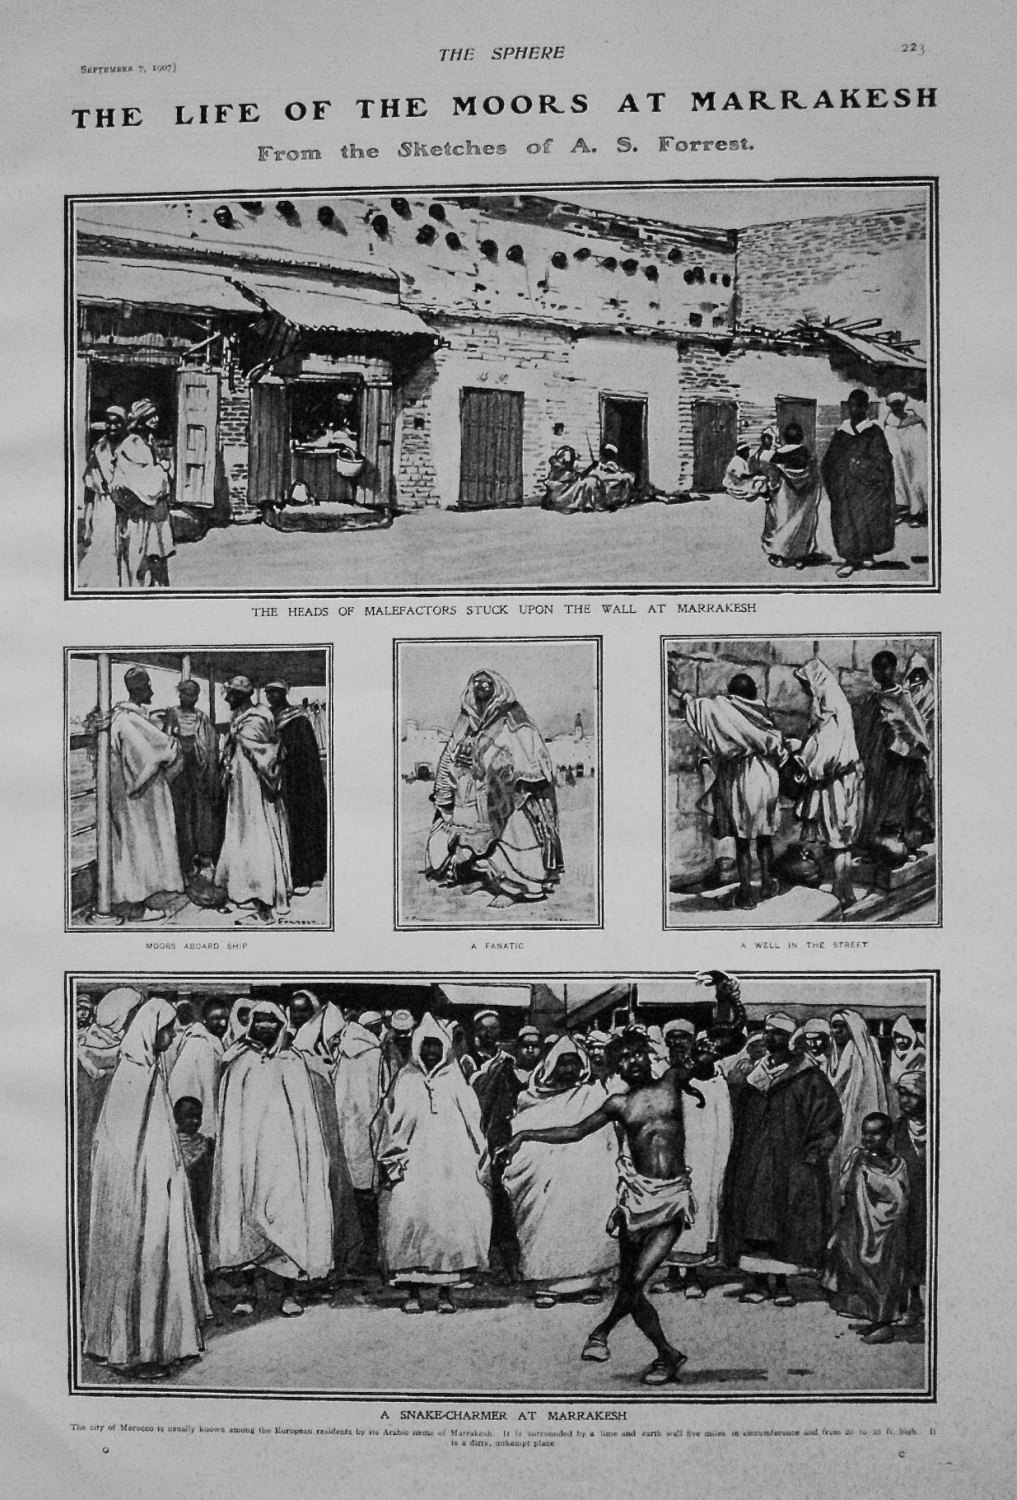 The Life of the Moors at Marrakesh. 1907